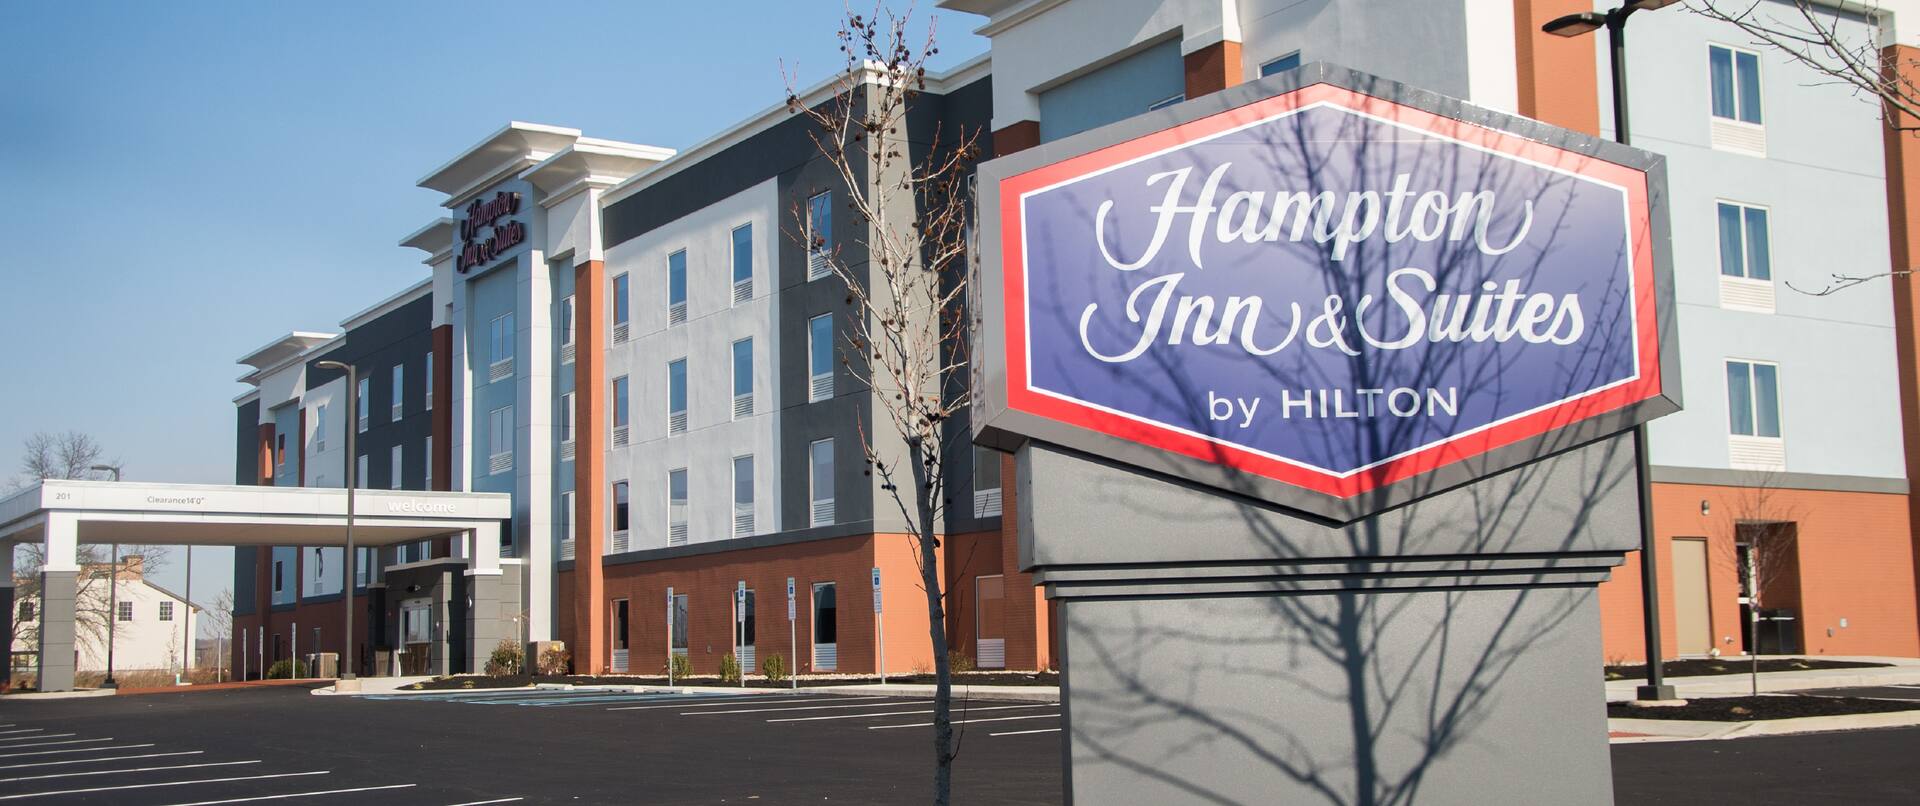 Hotel Building Exterior with Hampton Inn & Suites by Hilton Sign at Day